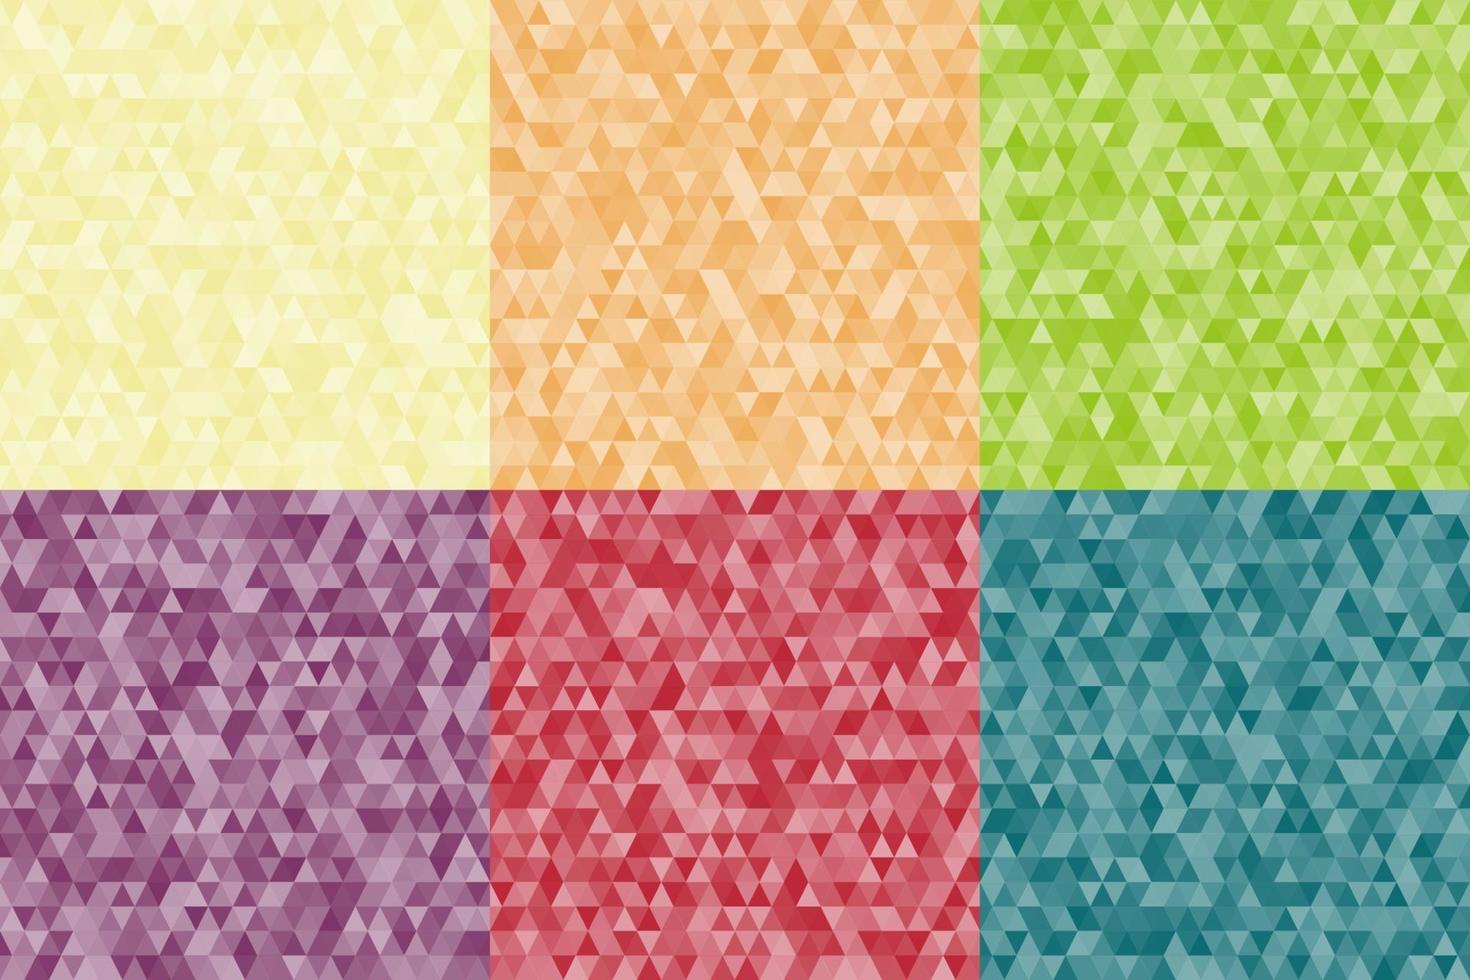 Set of abstract yellow, orange, green, blue, red, purple colors geometric triangles shapes mosaic pattern background vector